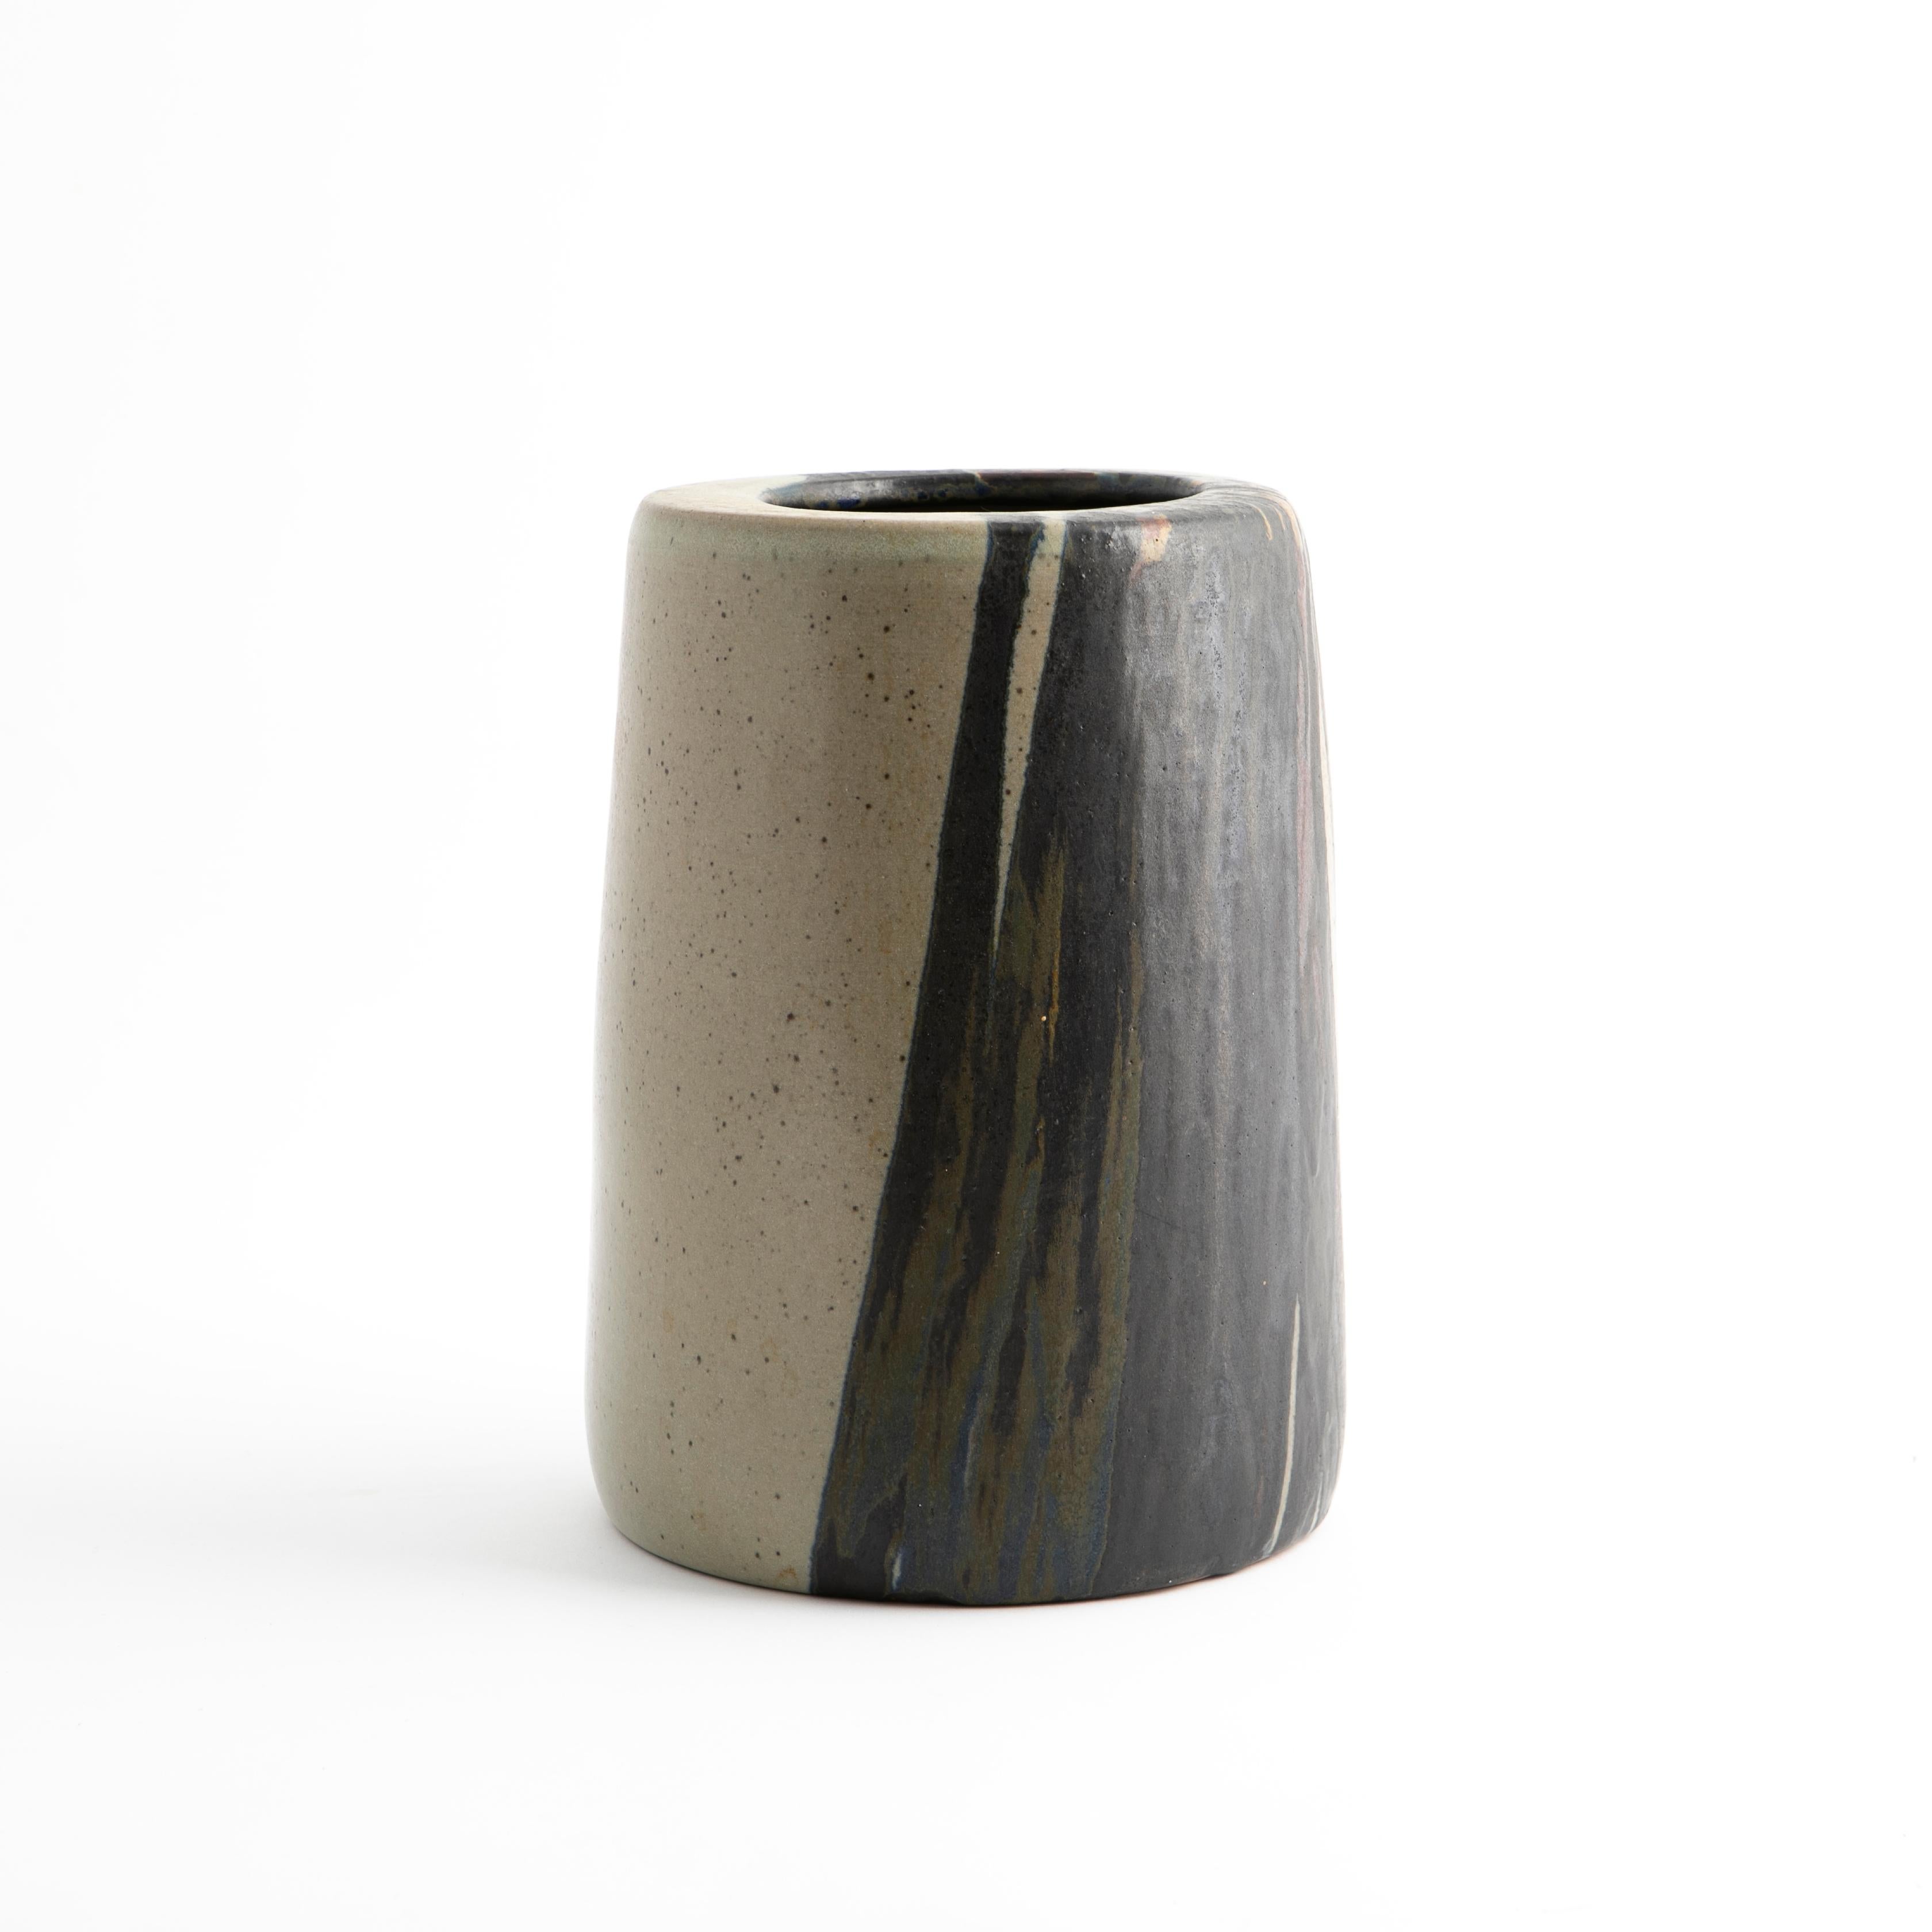 Jacob Bang, Danish 1932-2011
Unique vase in glazed stoneware. Beautiful glaze in shades grey, white, black and earth tones.

Signed Jacob Bang 1970

Jacob Bang was a Danish ceramicist, designer and sculptor and the son of ceramic artist Arne